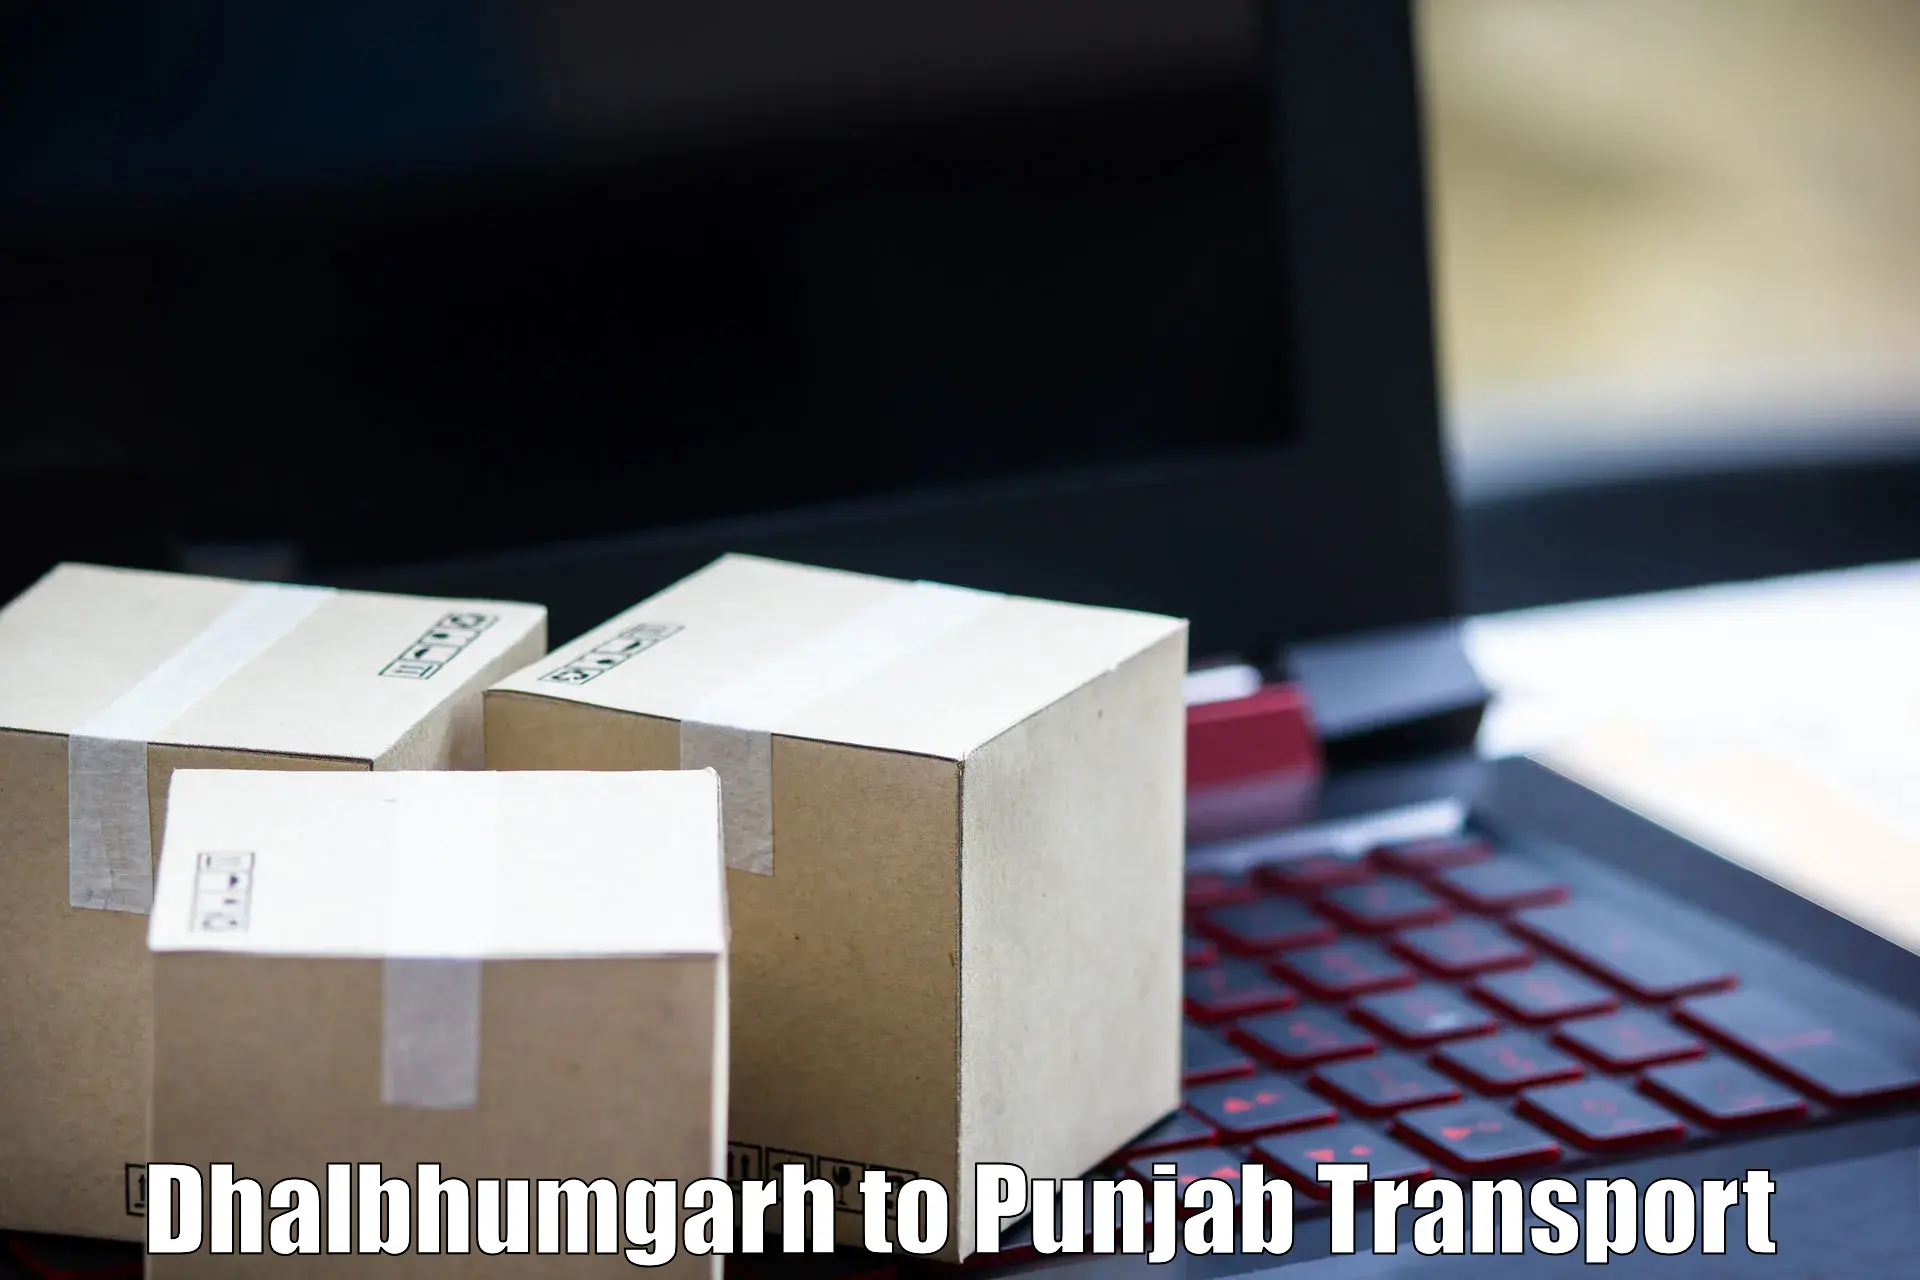 Container transport service Dhalbhumgarh to Firozpur